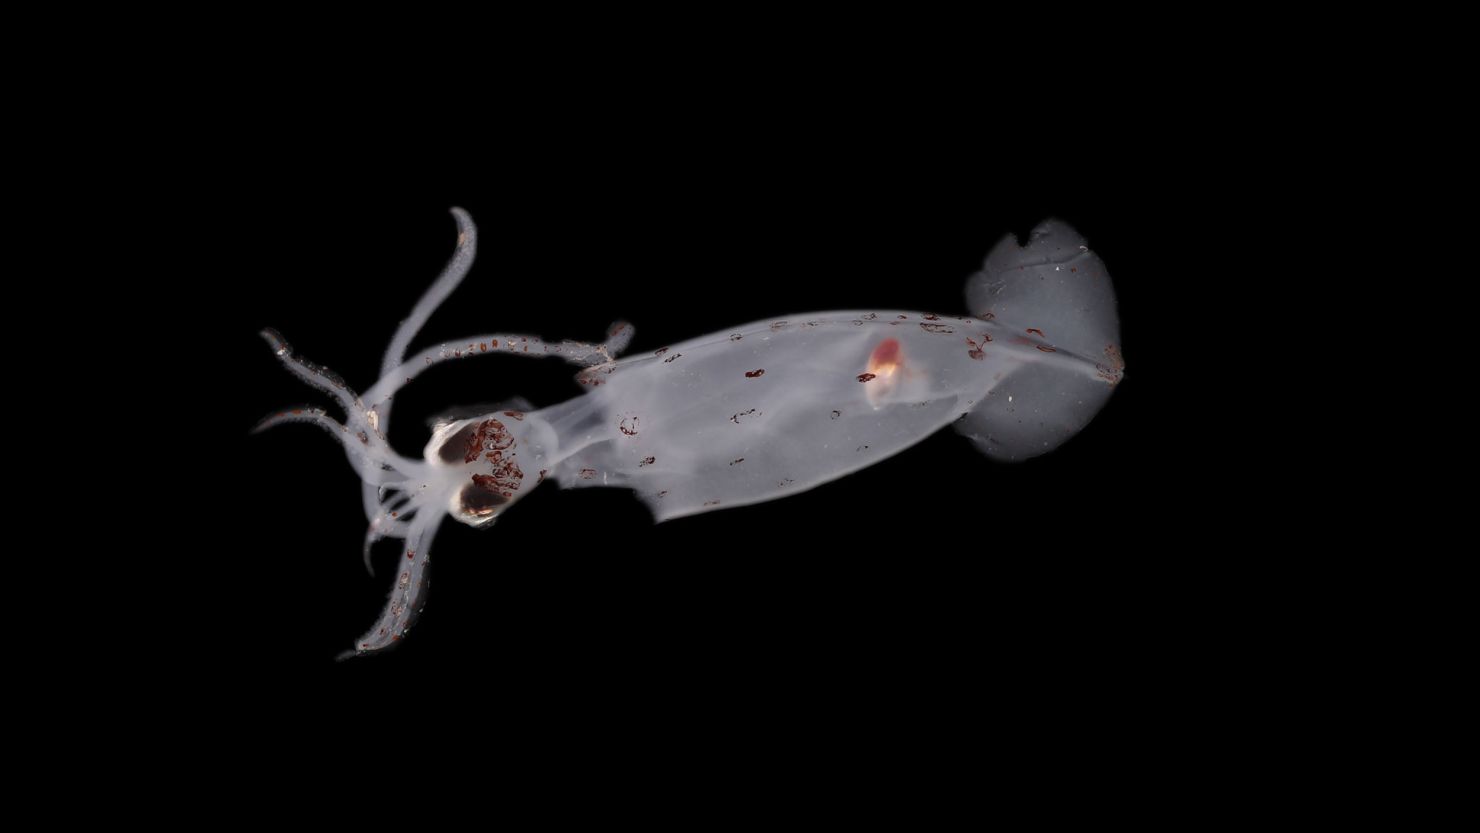 100 potential new deep-sea species discovered, including mystery creature